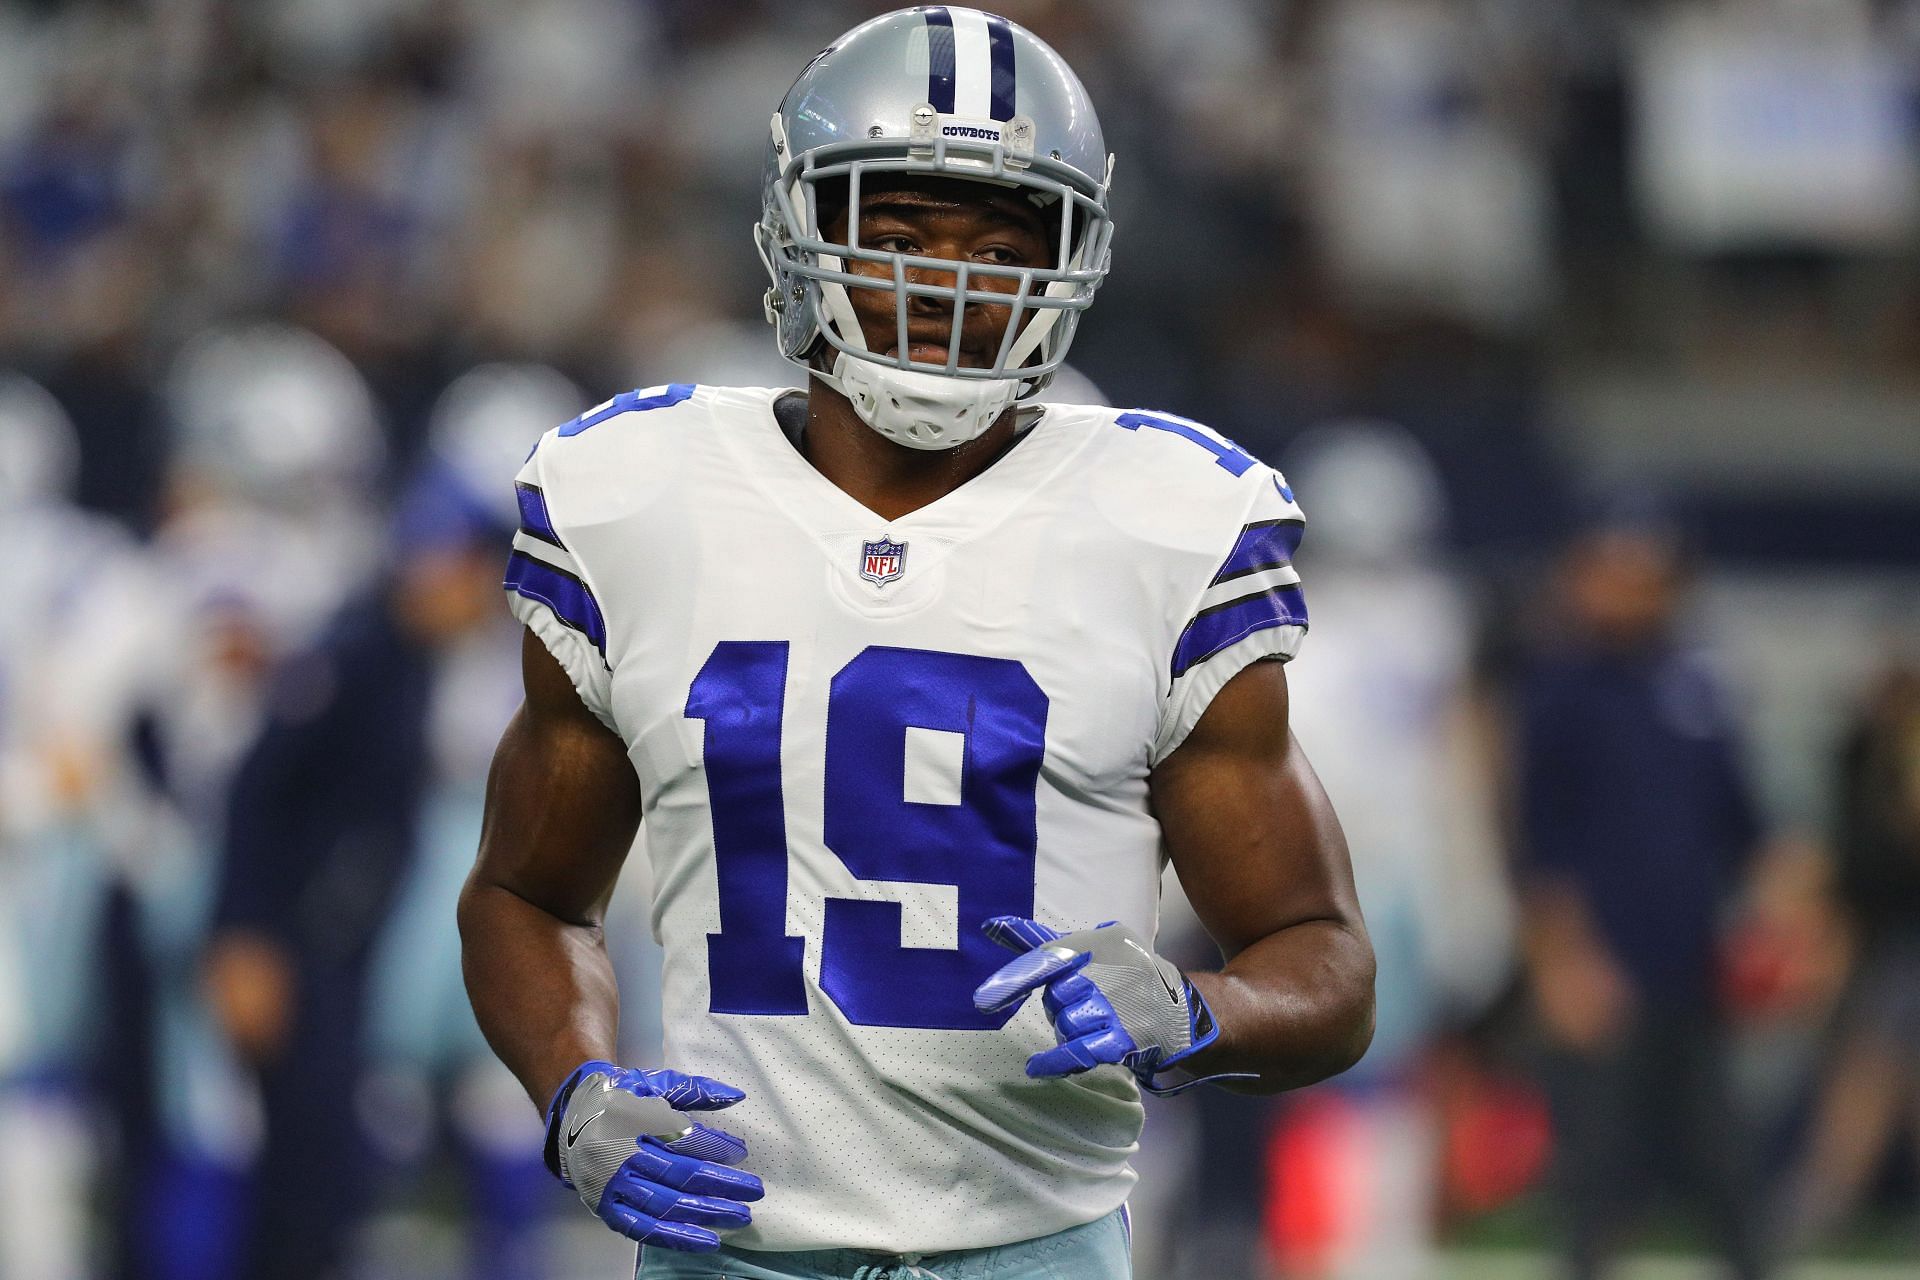 Amari Cooper was traded at the NFL Trade Deadline in 2018